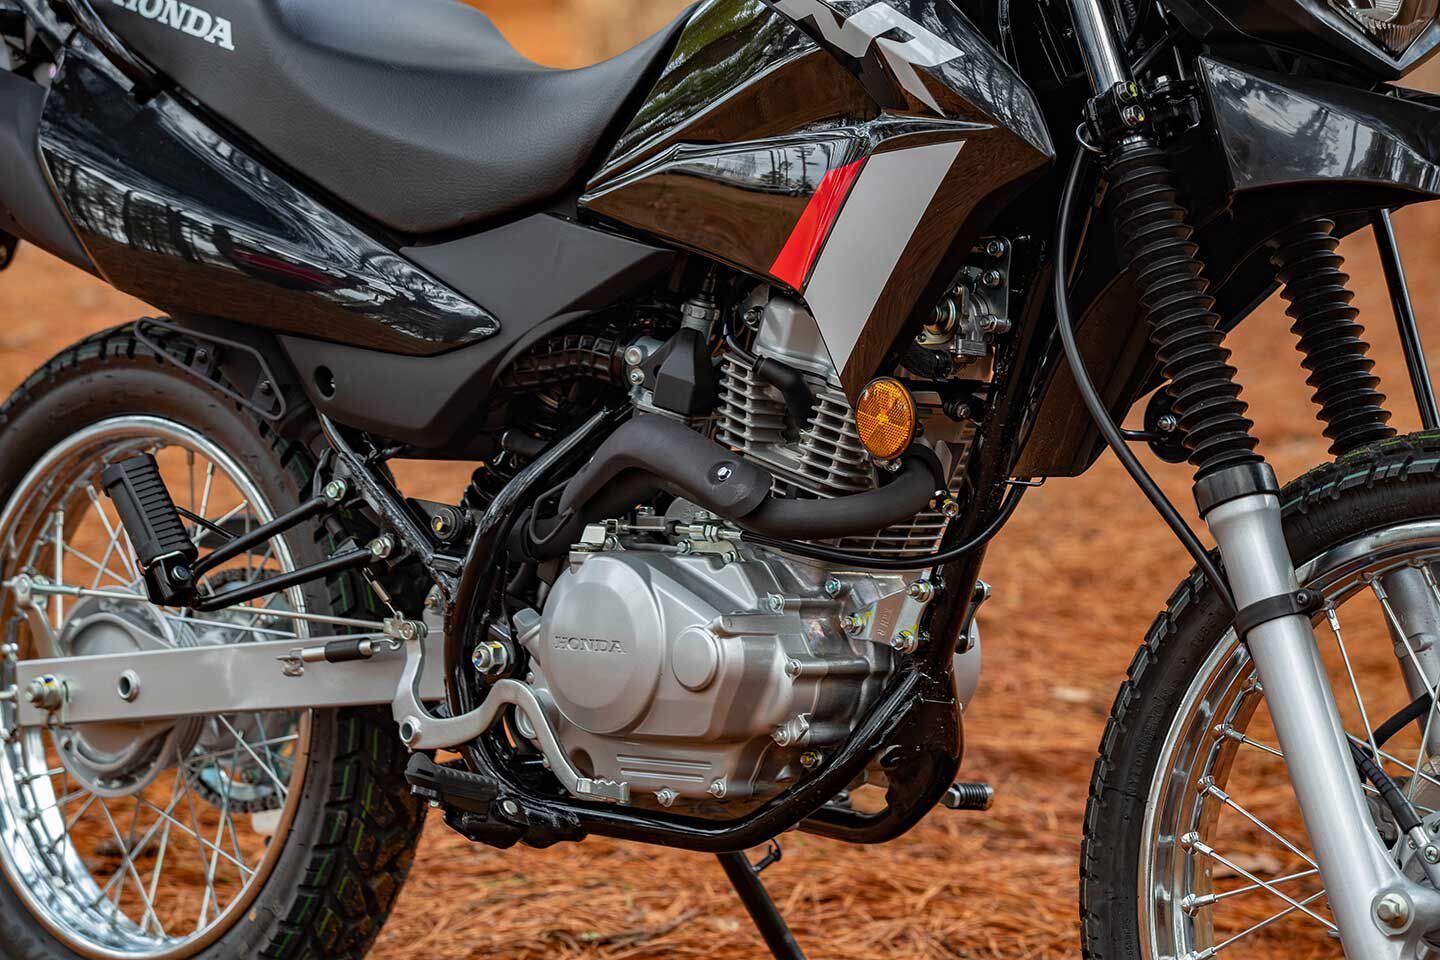 The XR150L uses a basic steel cradle frame and nonadjustable suspension (save preload in the rear).